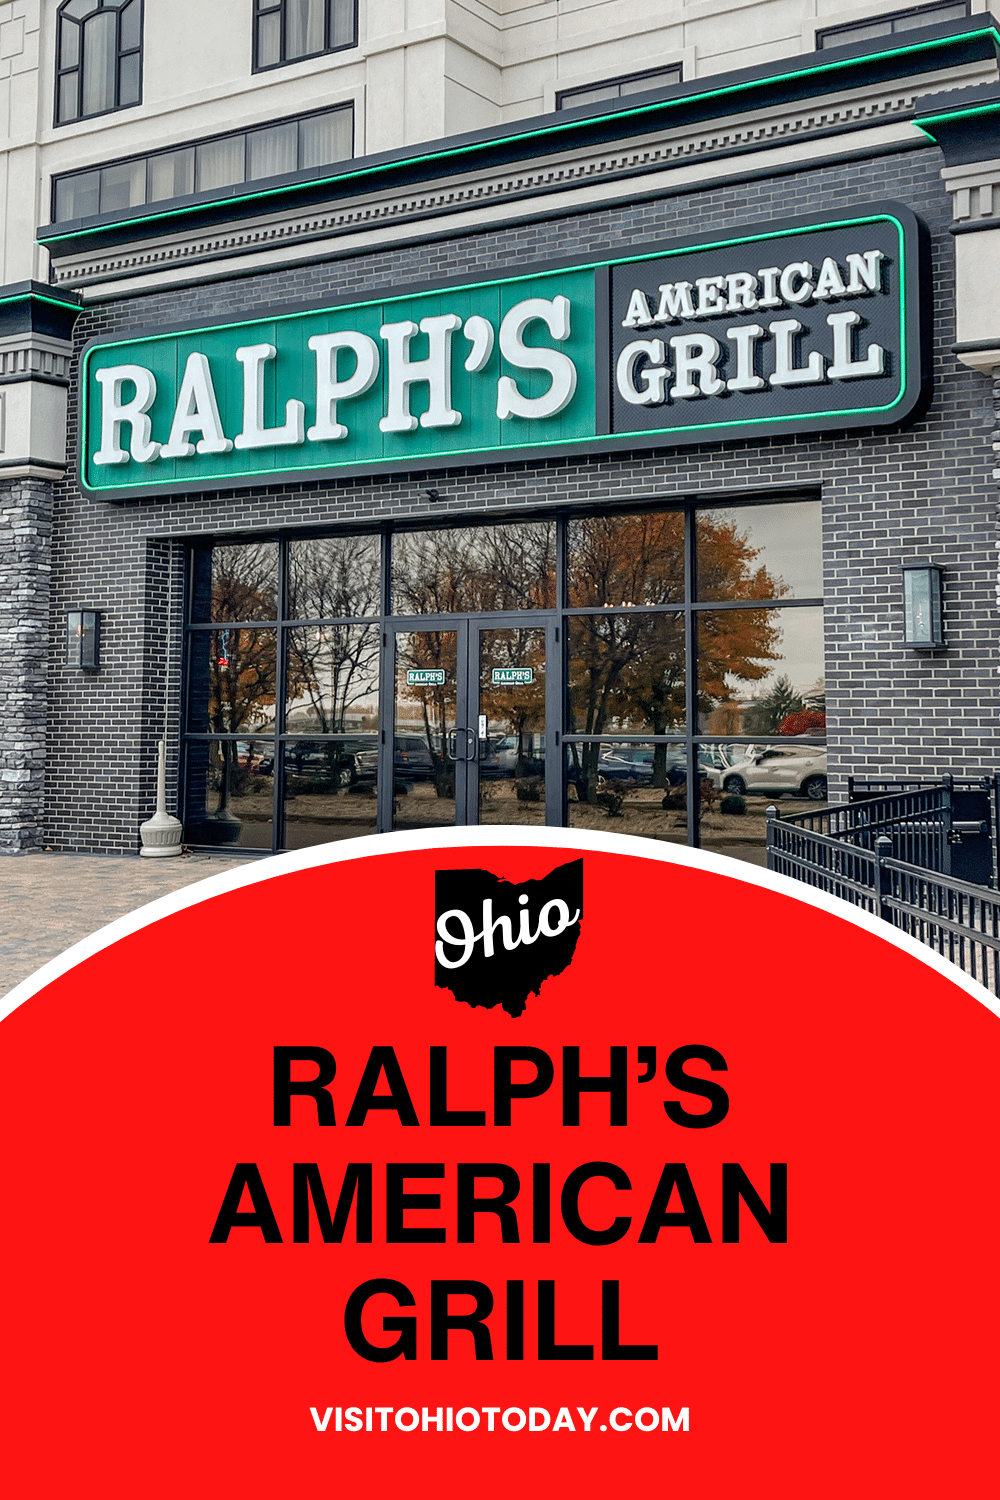 Ralph’s American Grill serves gourmet burgers, house-smoked BBQ, steaks, and more. From the automotive decor to the creatively named menu items, they pay homage to the trucking and transportation industry that is so important to Wilmington’s history.